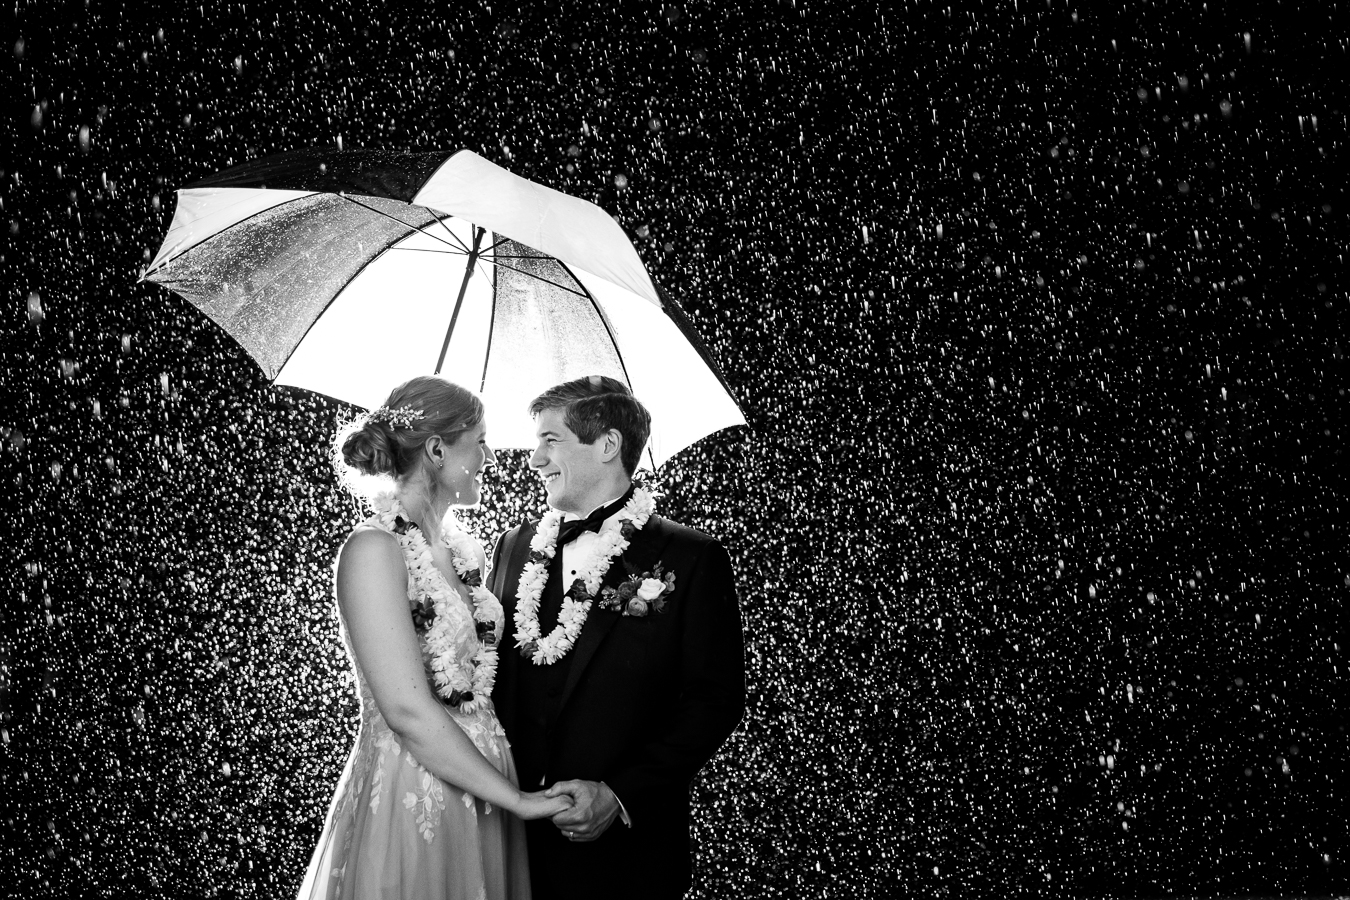 unique, creative rainy wedding day portrait of the bride and groom as they stand under an umbrella in the rain after their Elizabeth Furnace Wedding in litiz, pa captured by rhinehart photography 